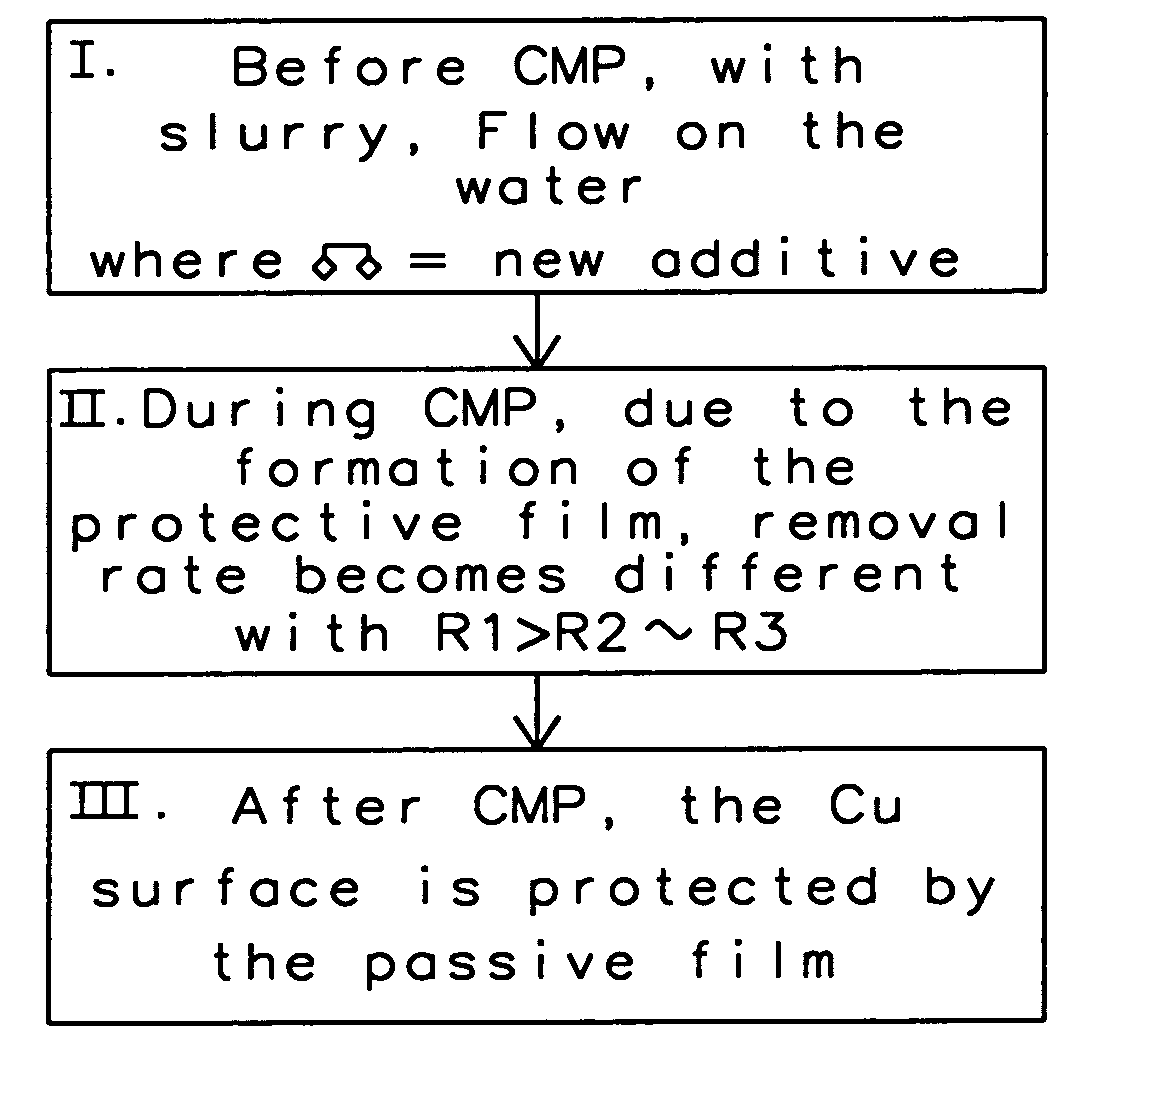 Chemical agent additives in copper CMP slurry